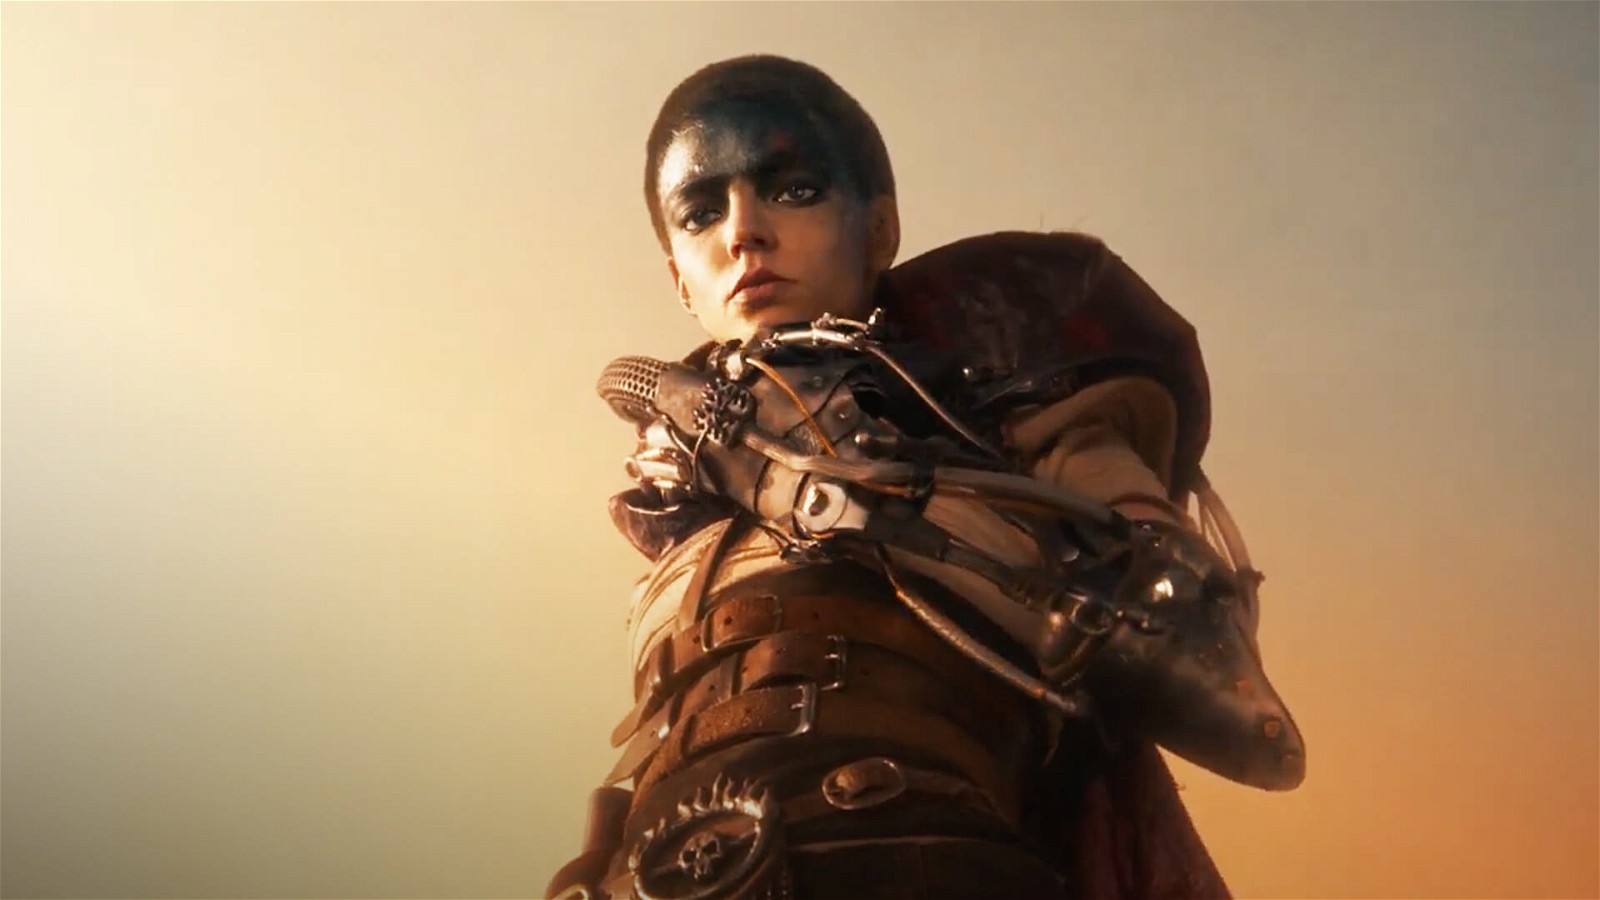 Adding how Furiosa lost her arm would have made the film more tragic